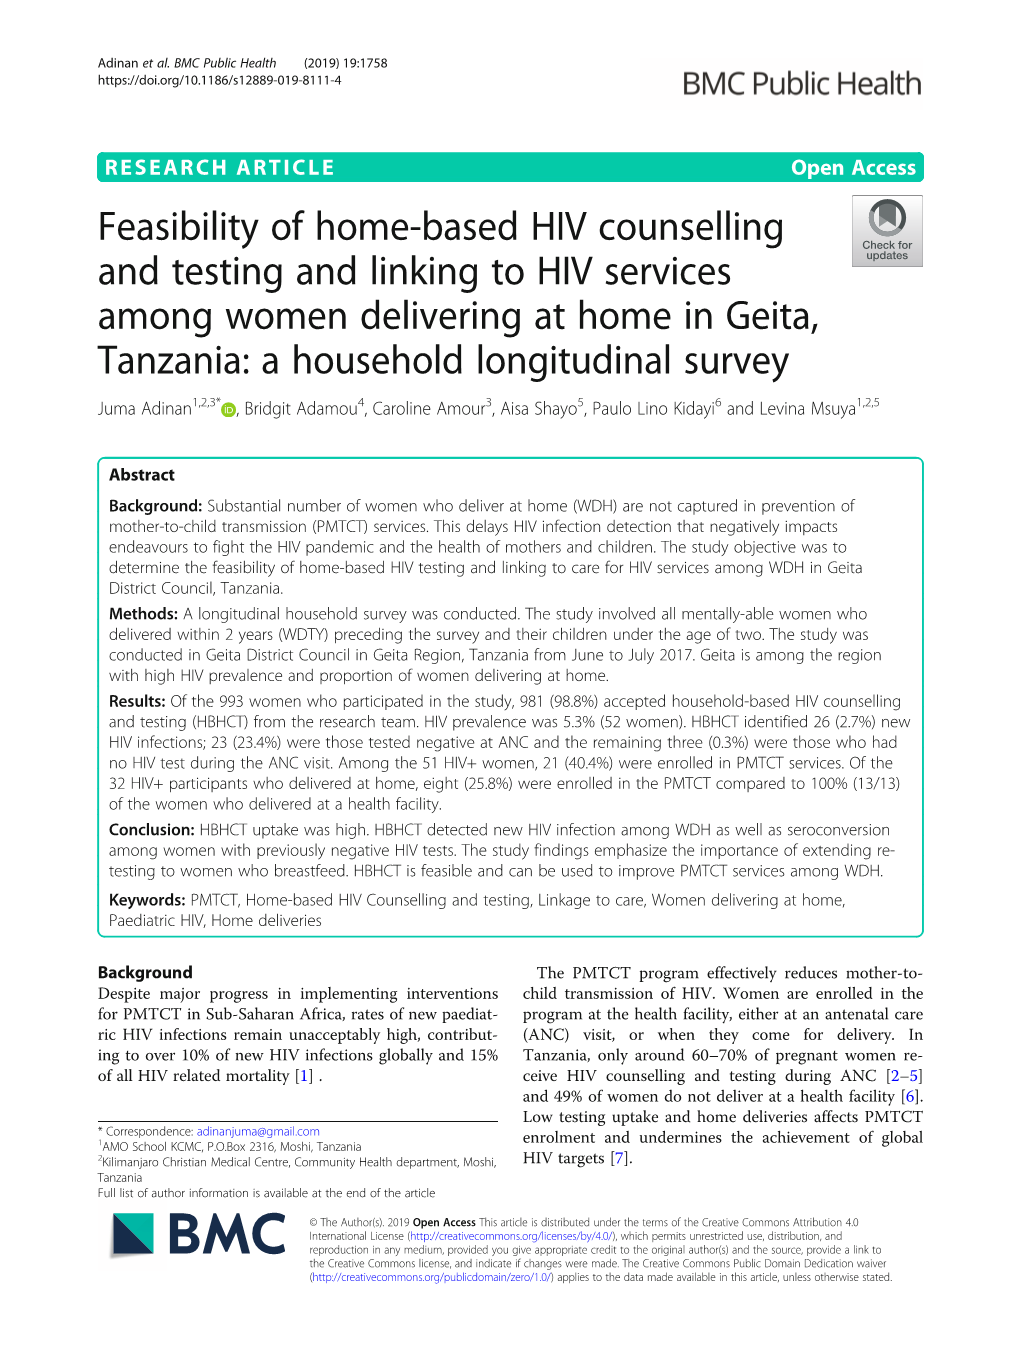 Feasibility of Home-Based HIV Counselling and Testing and Linking